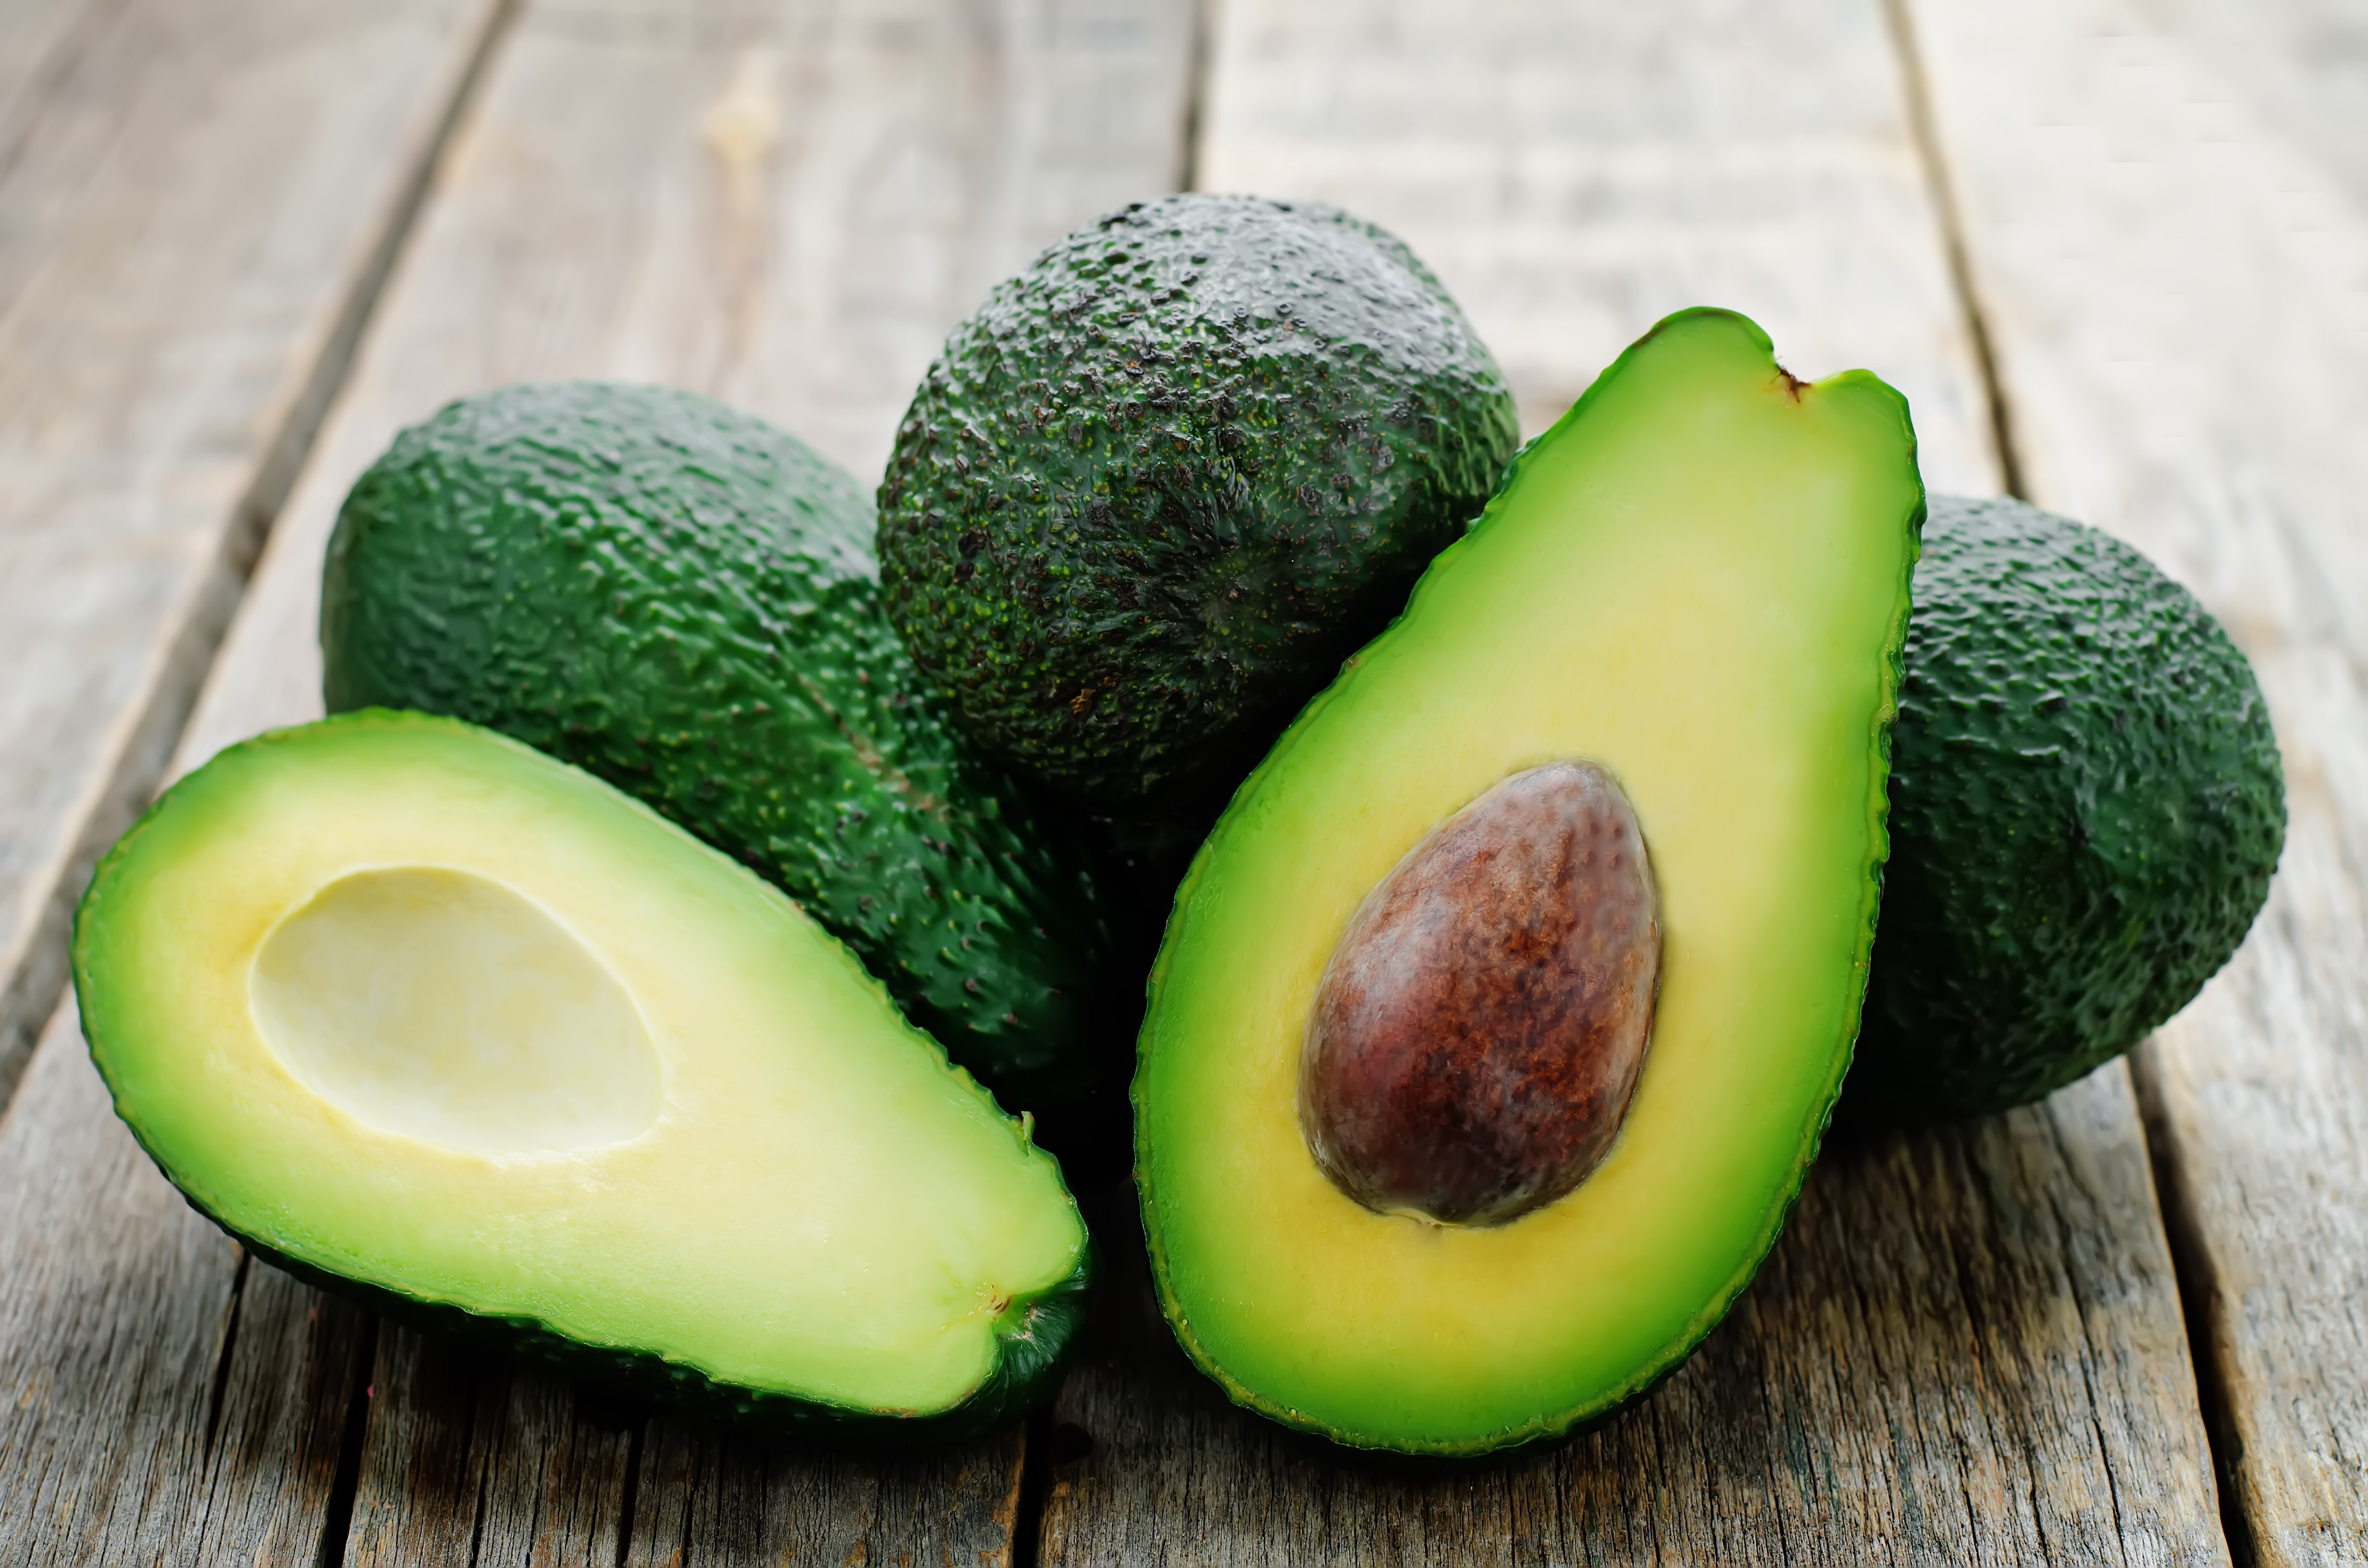 top 5 reasons to eat avocados